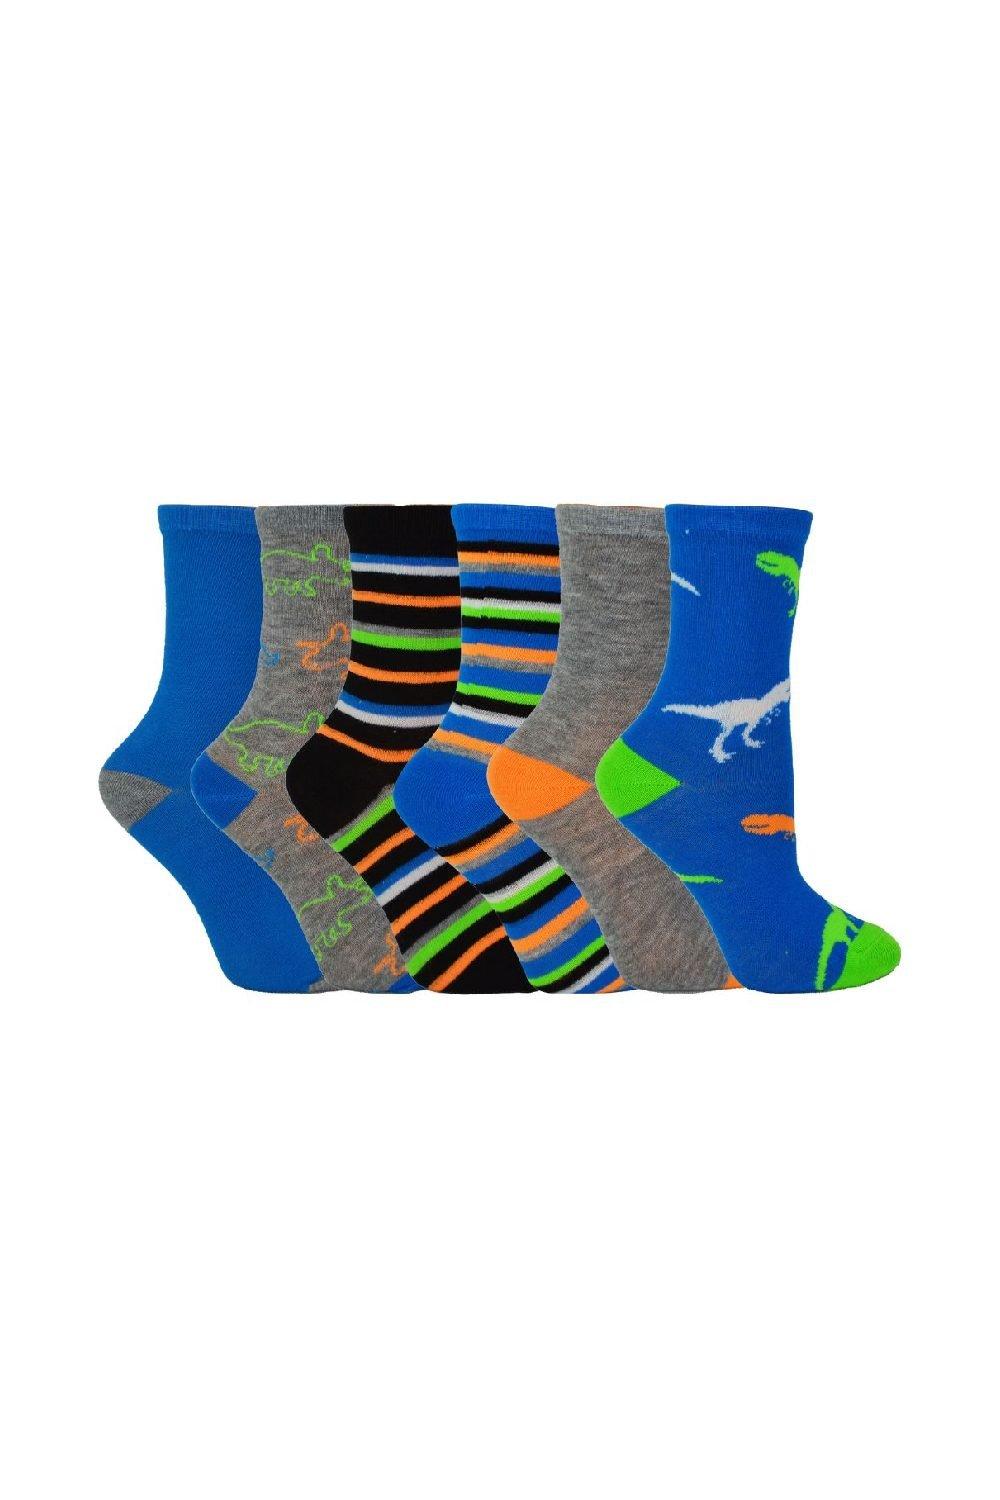 6 Pairs Novelty Dinosaurs & Funky Faces Design Colourful Socks